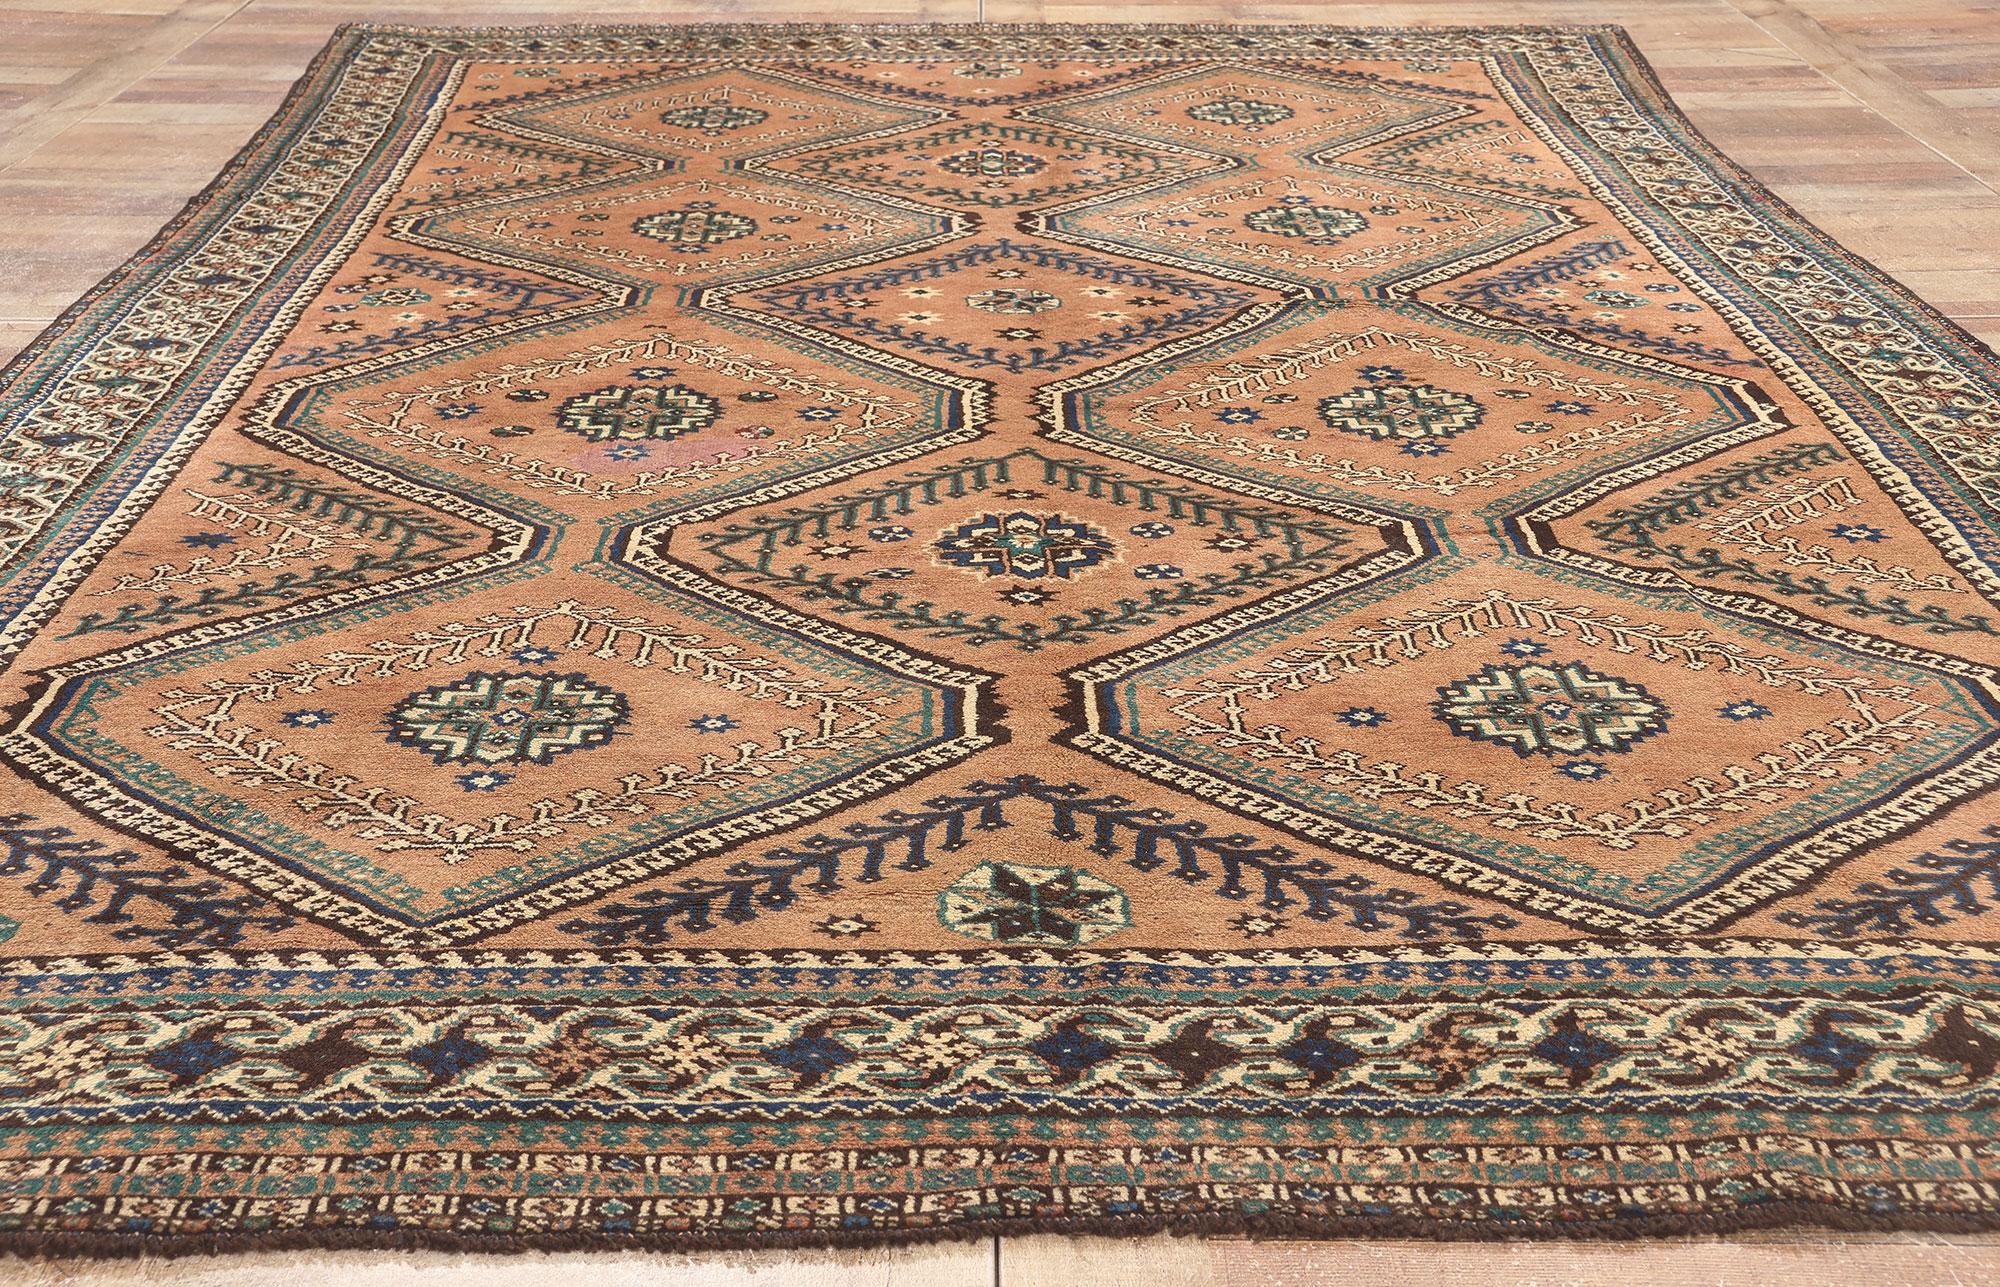 Earth-Tone Vintage Persian Shiraz Rug, Cozy Nomad Meets Beguiling Charm For Sale 1